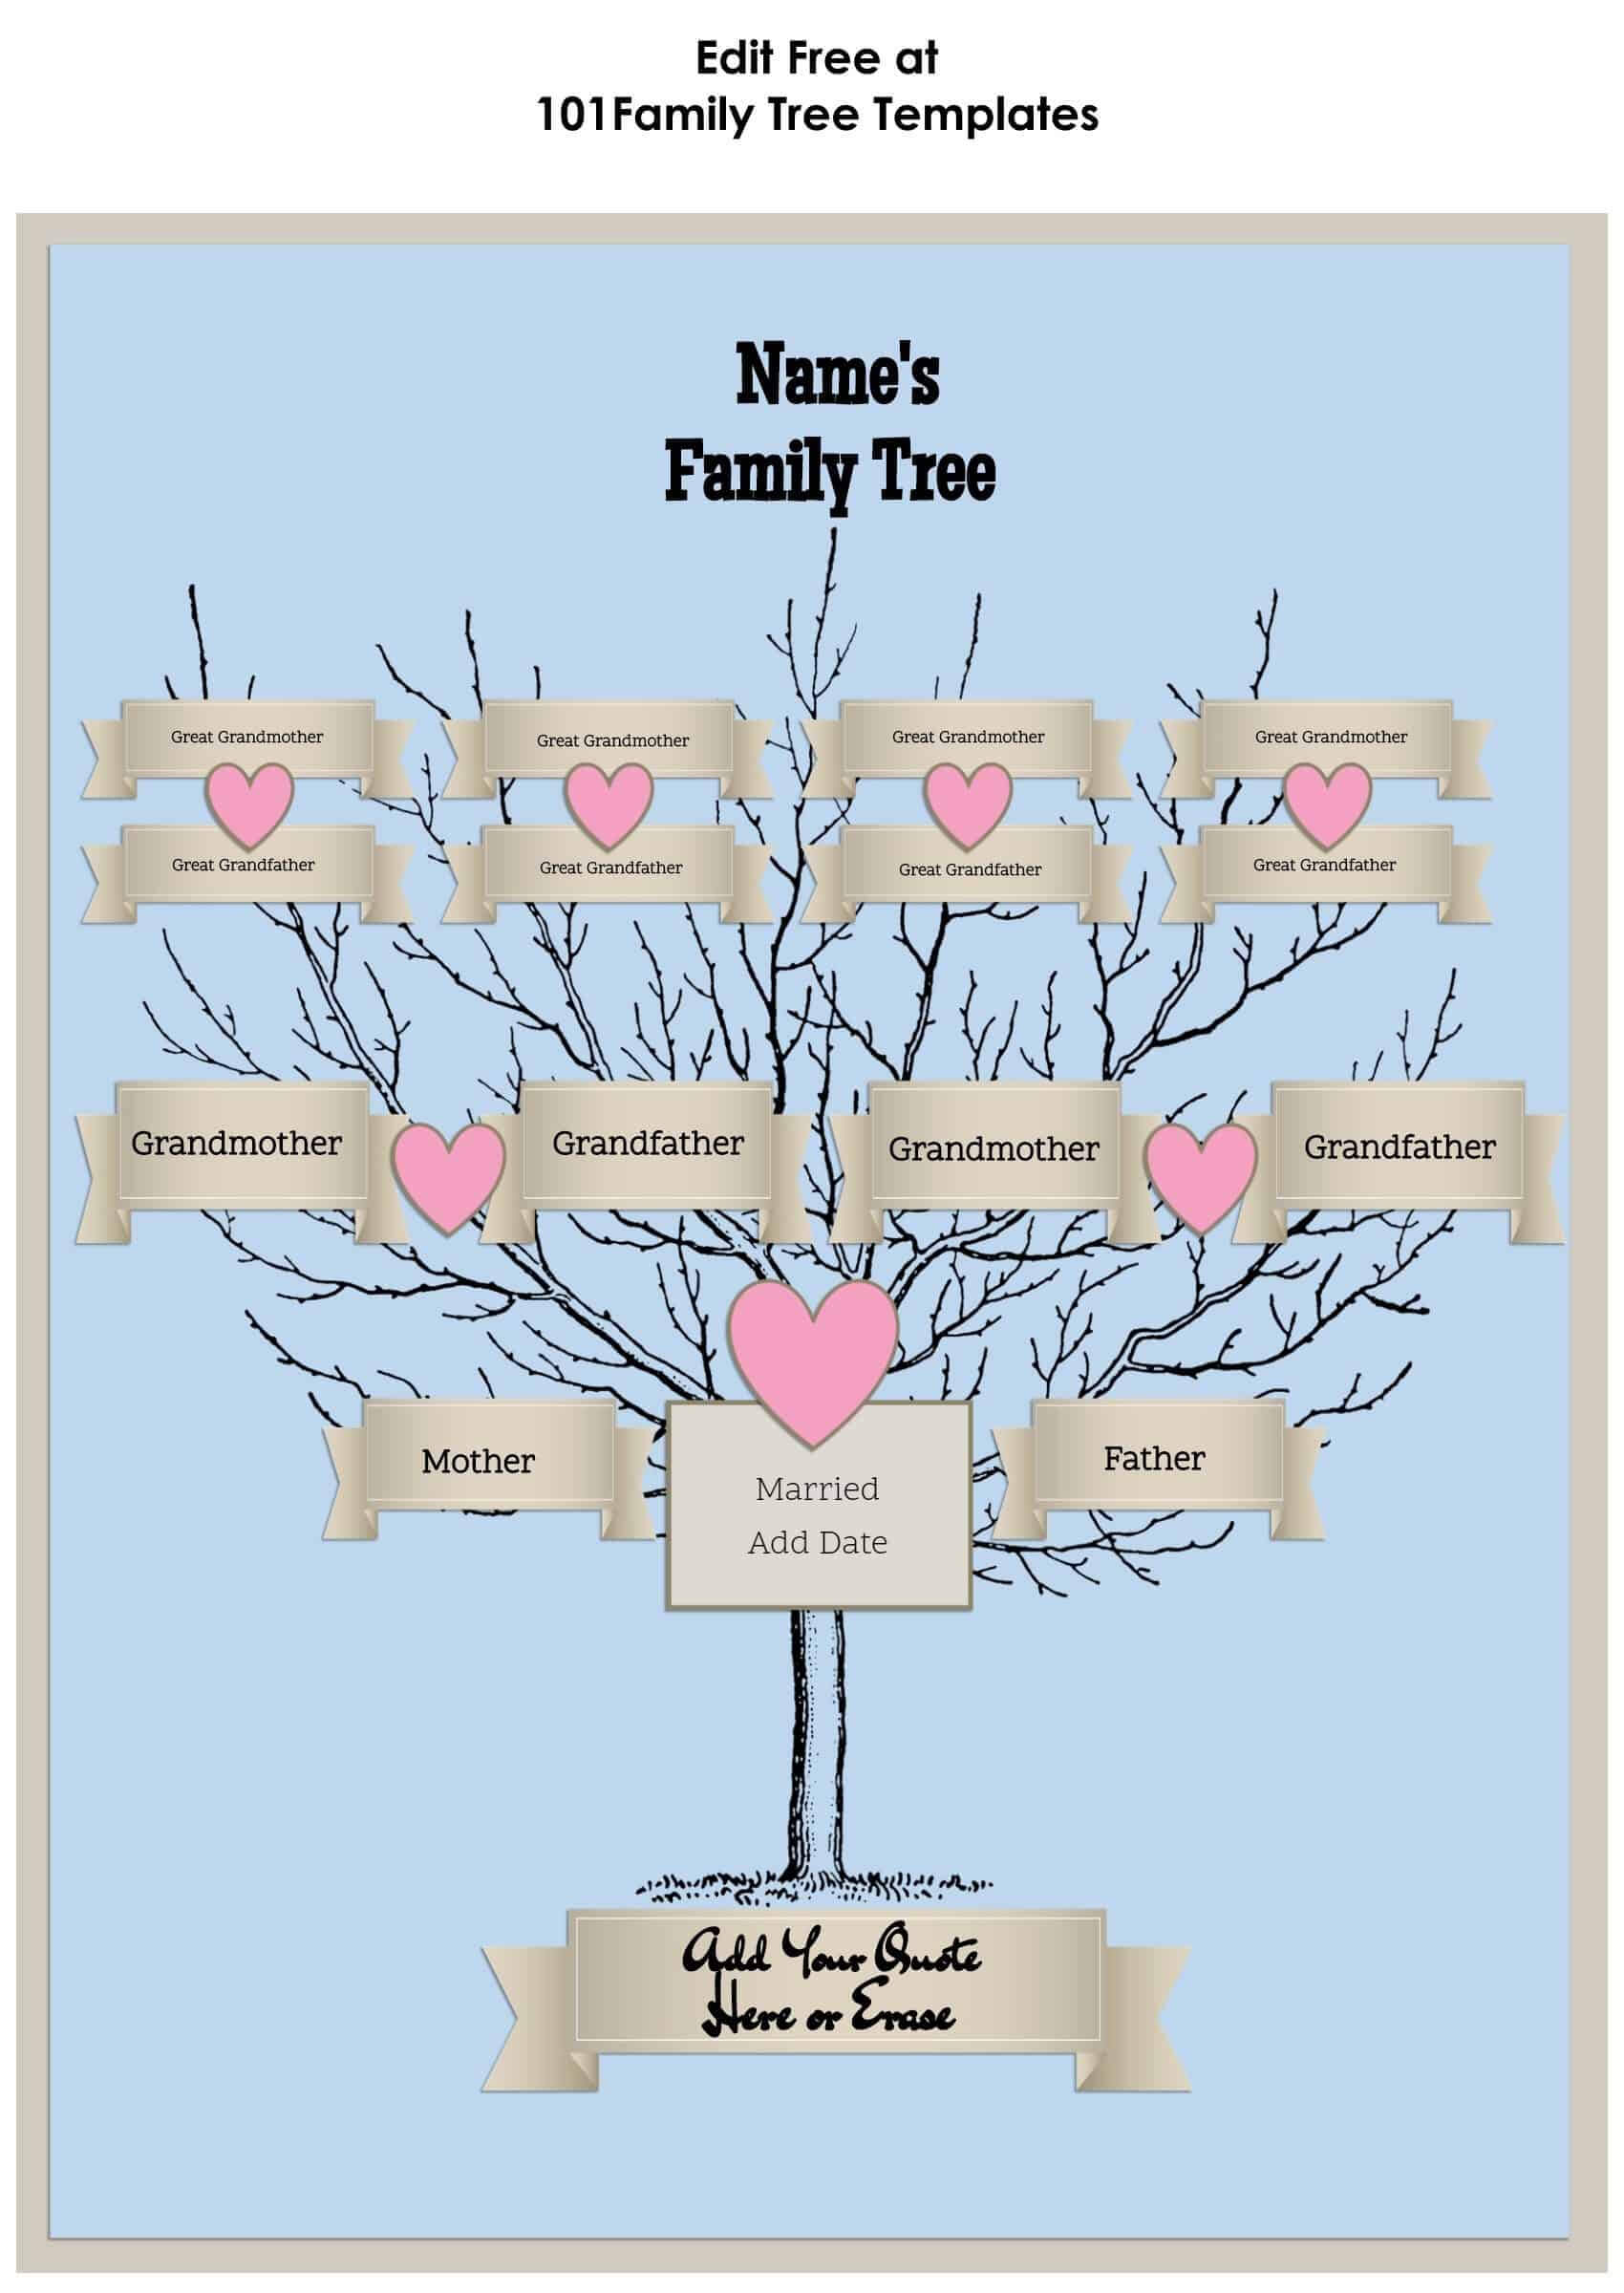 3 Generation Family Tree Generator | All Templates Are Free With Regard To Blank Family Tree Template 3 Generations